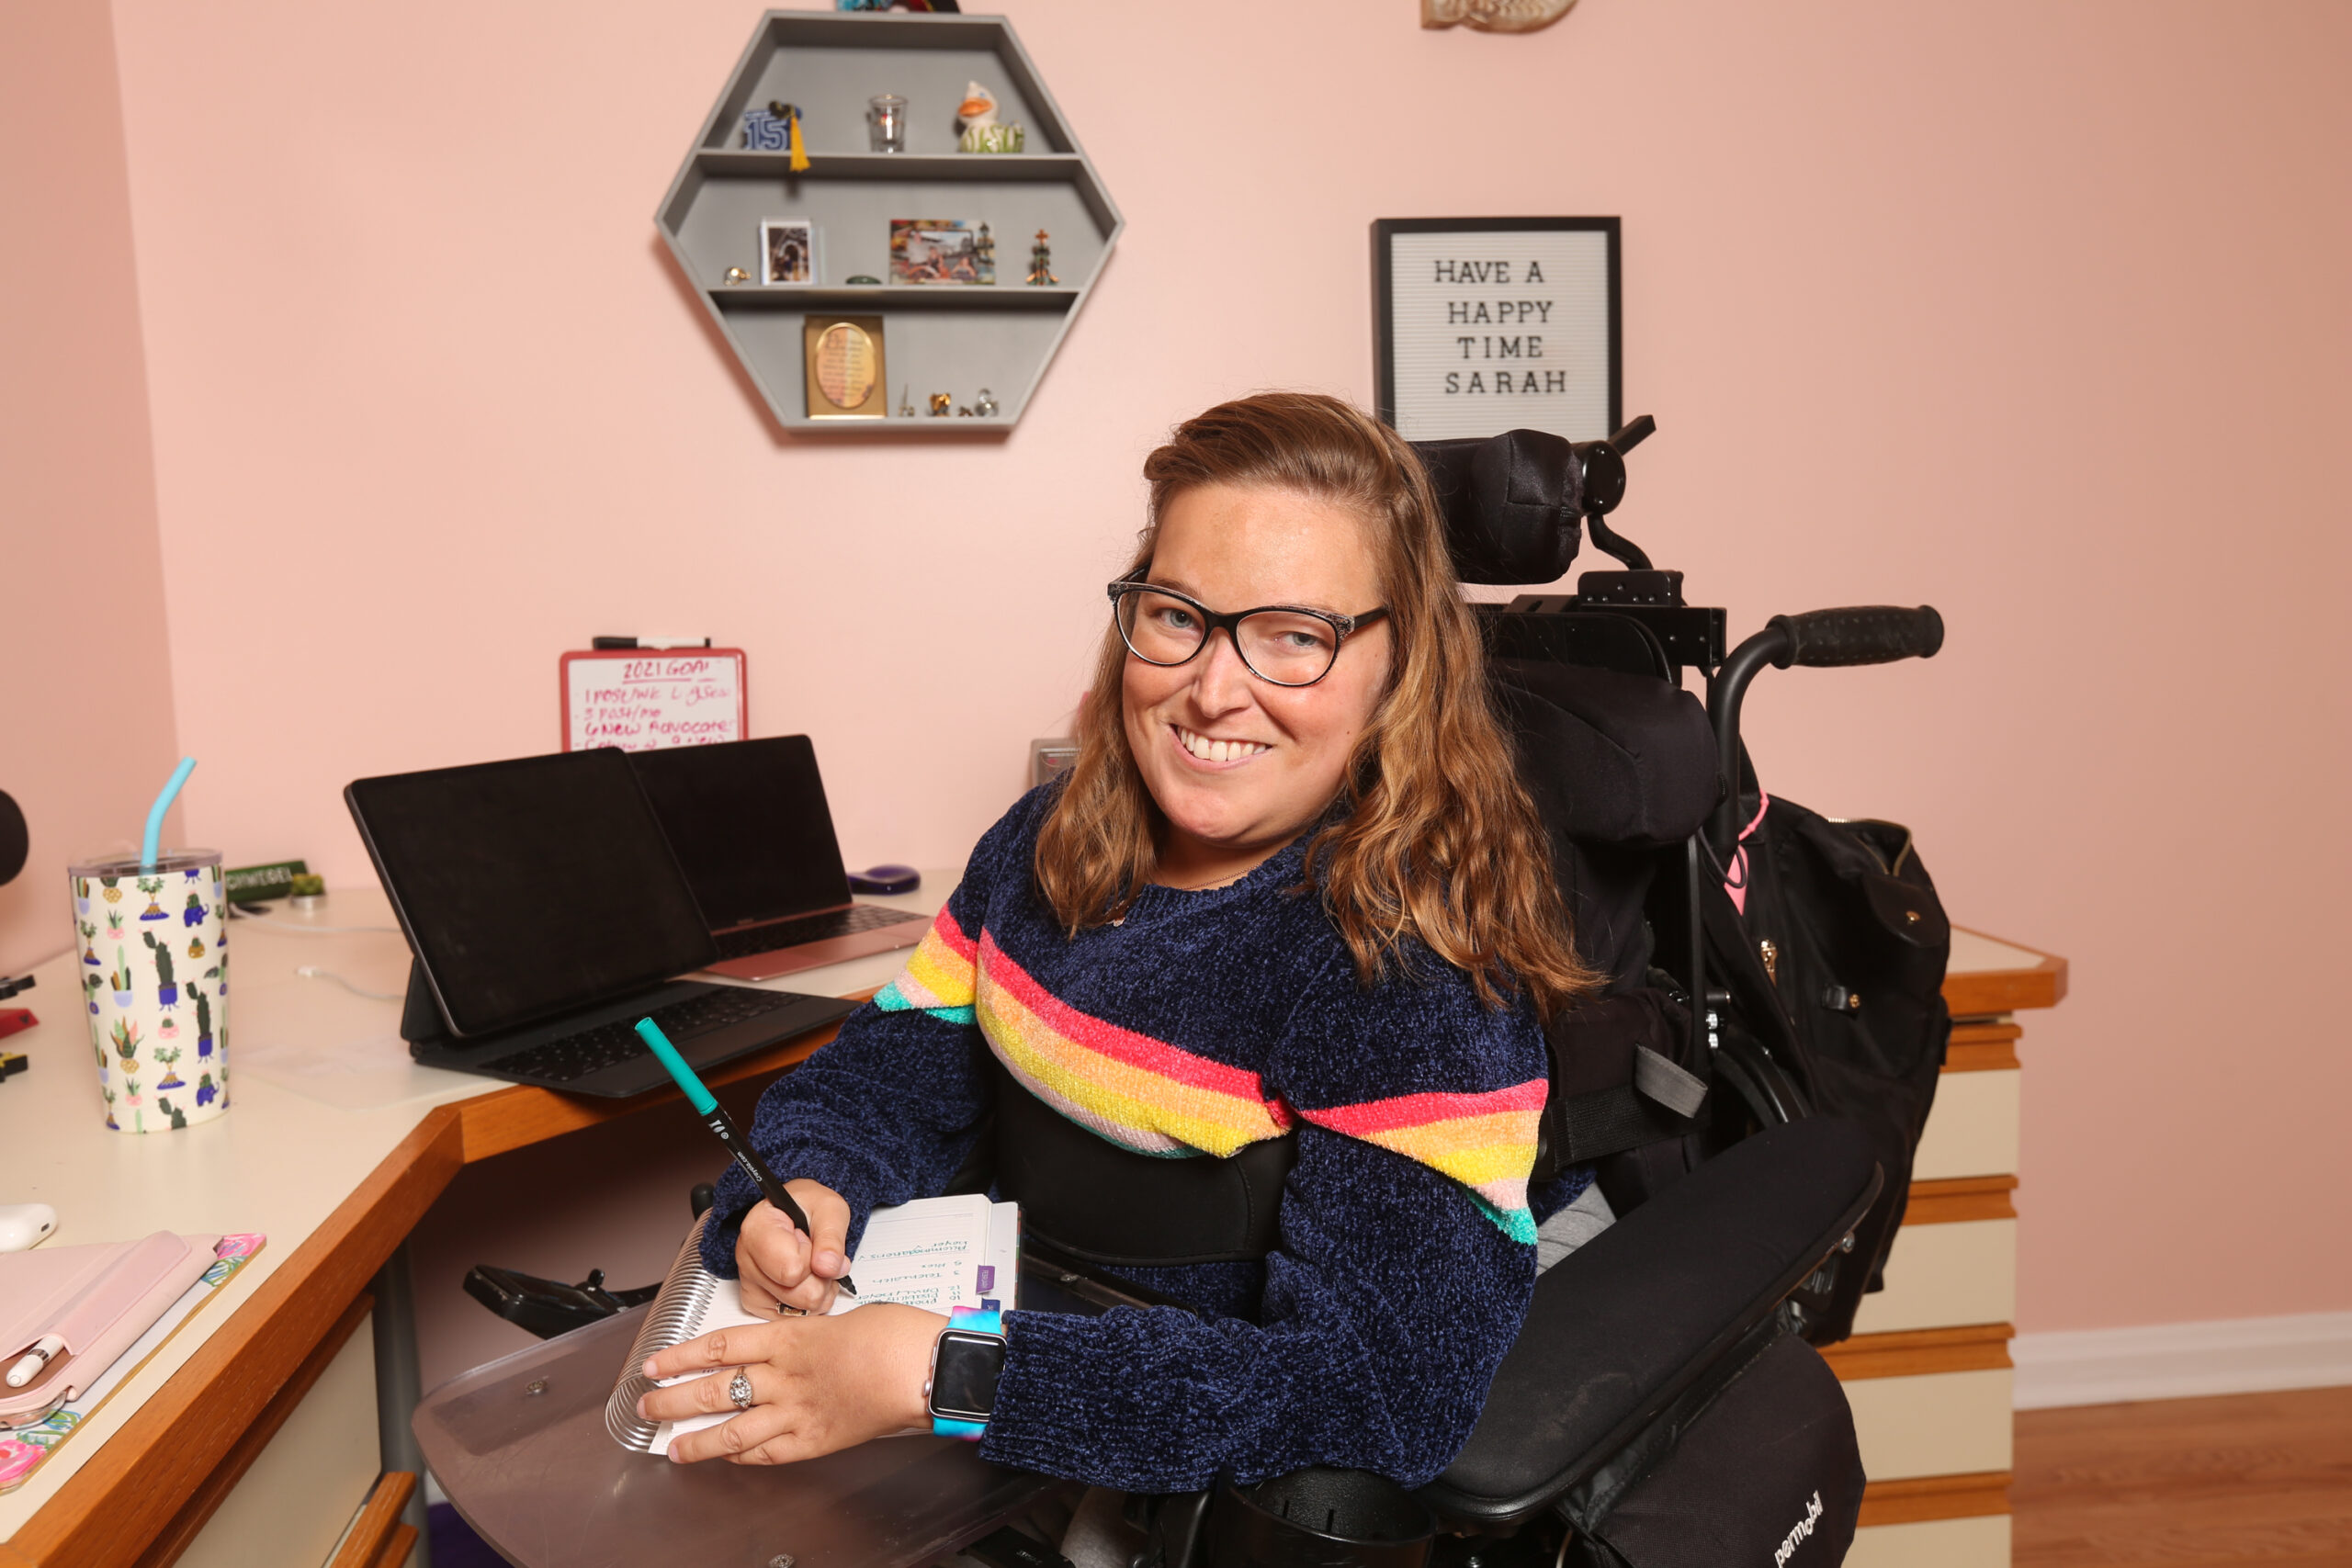 Sarah, pictured, is wearing black glasses and a wide smile. Sitting in her wheelchair at her desk at work, Sarah has a notepad and pen in hand. Behind here is a small framed sign that says: "Have a happy time Sarah"